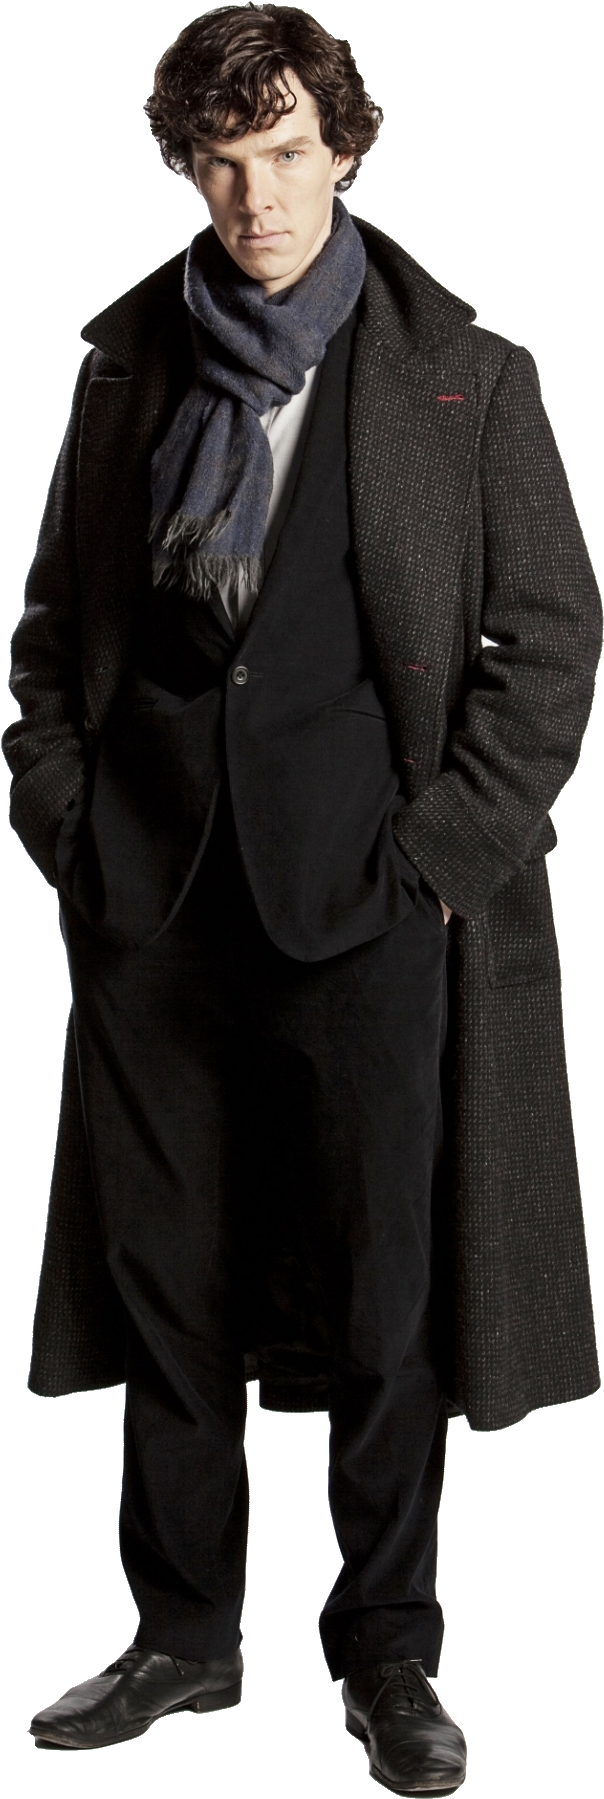 Modern Detective Standing Pose PNG image